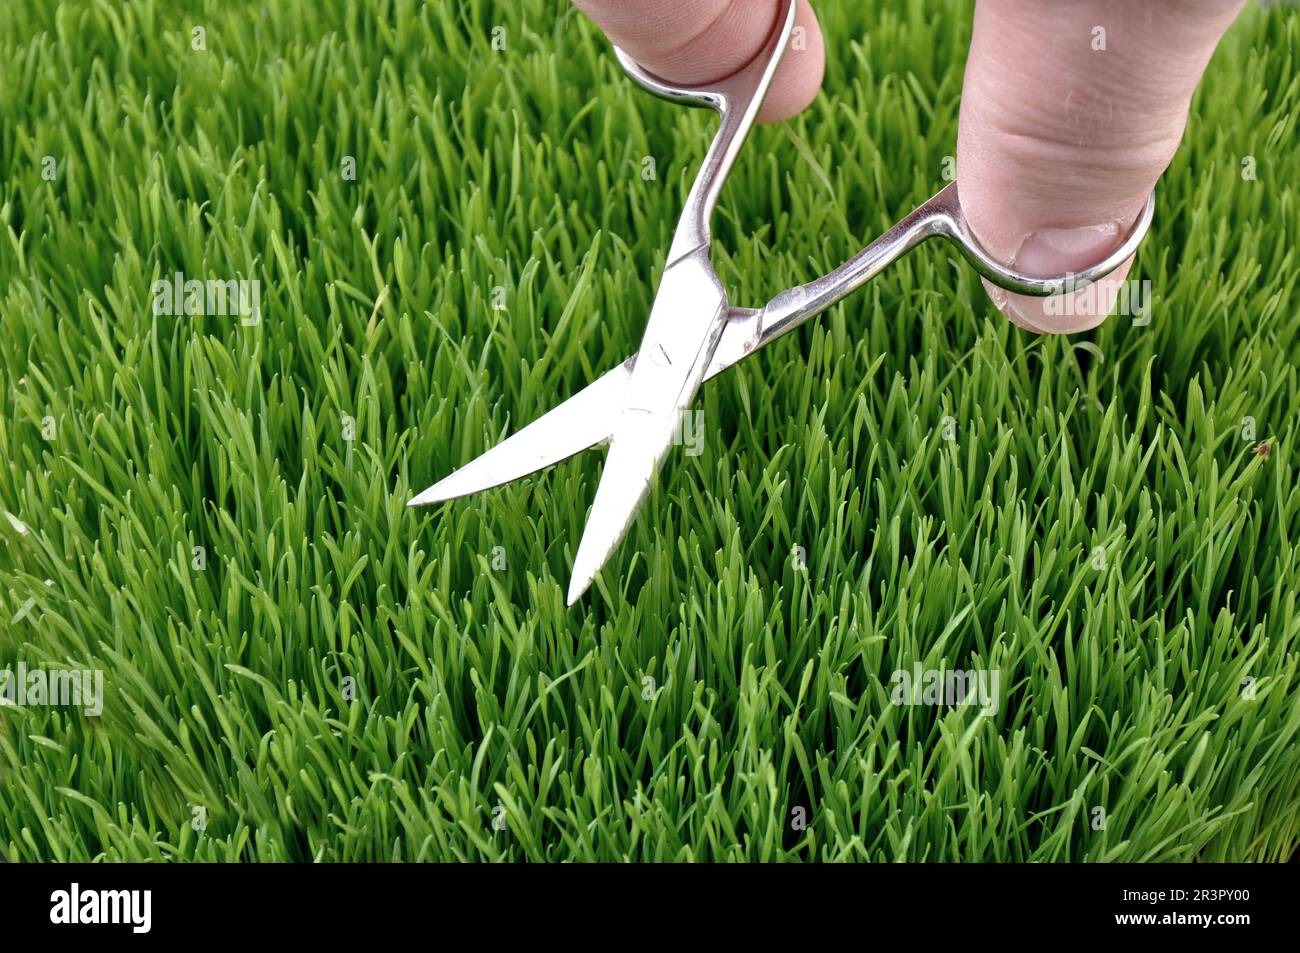 English lawn is cut with nail scissors Stock Photo